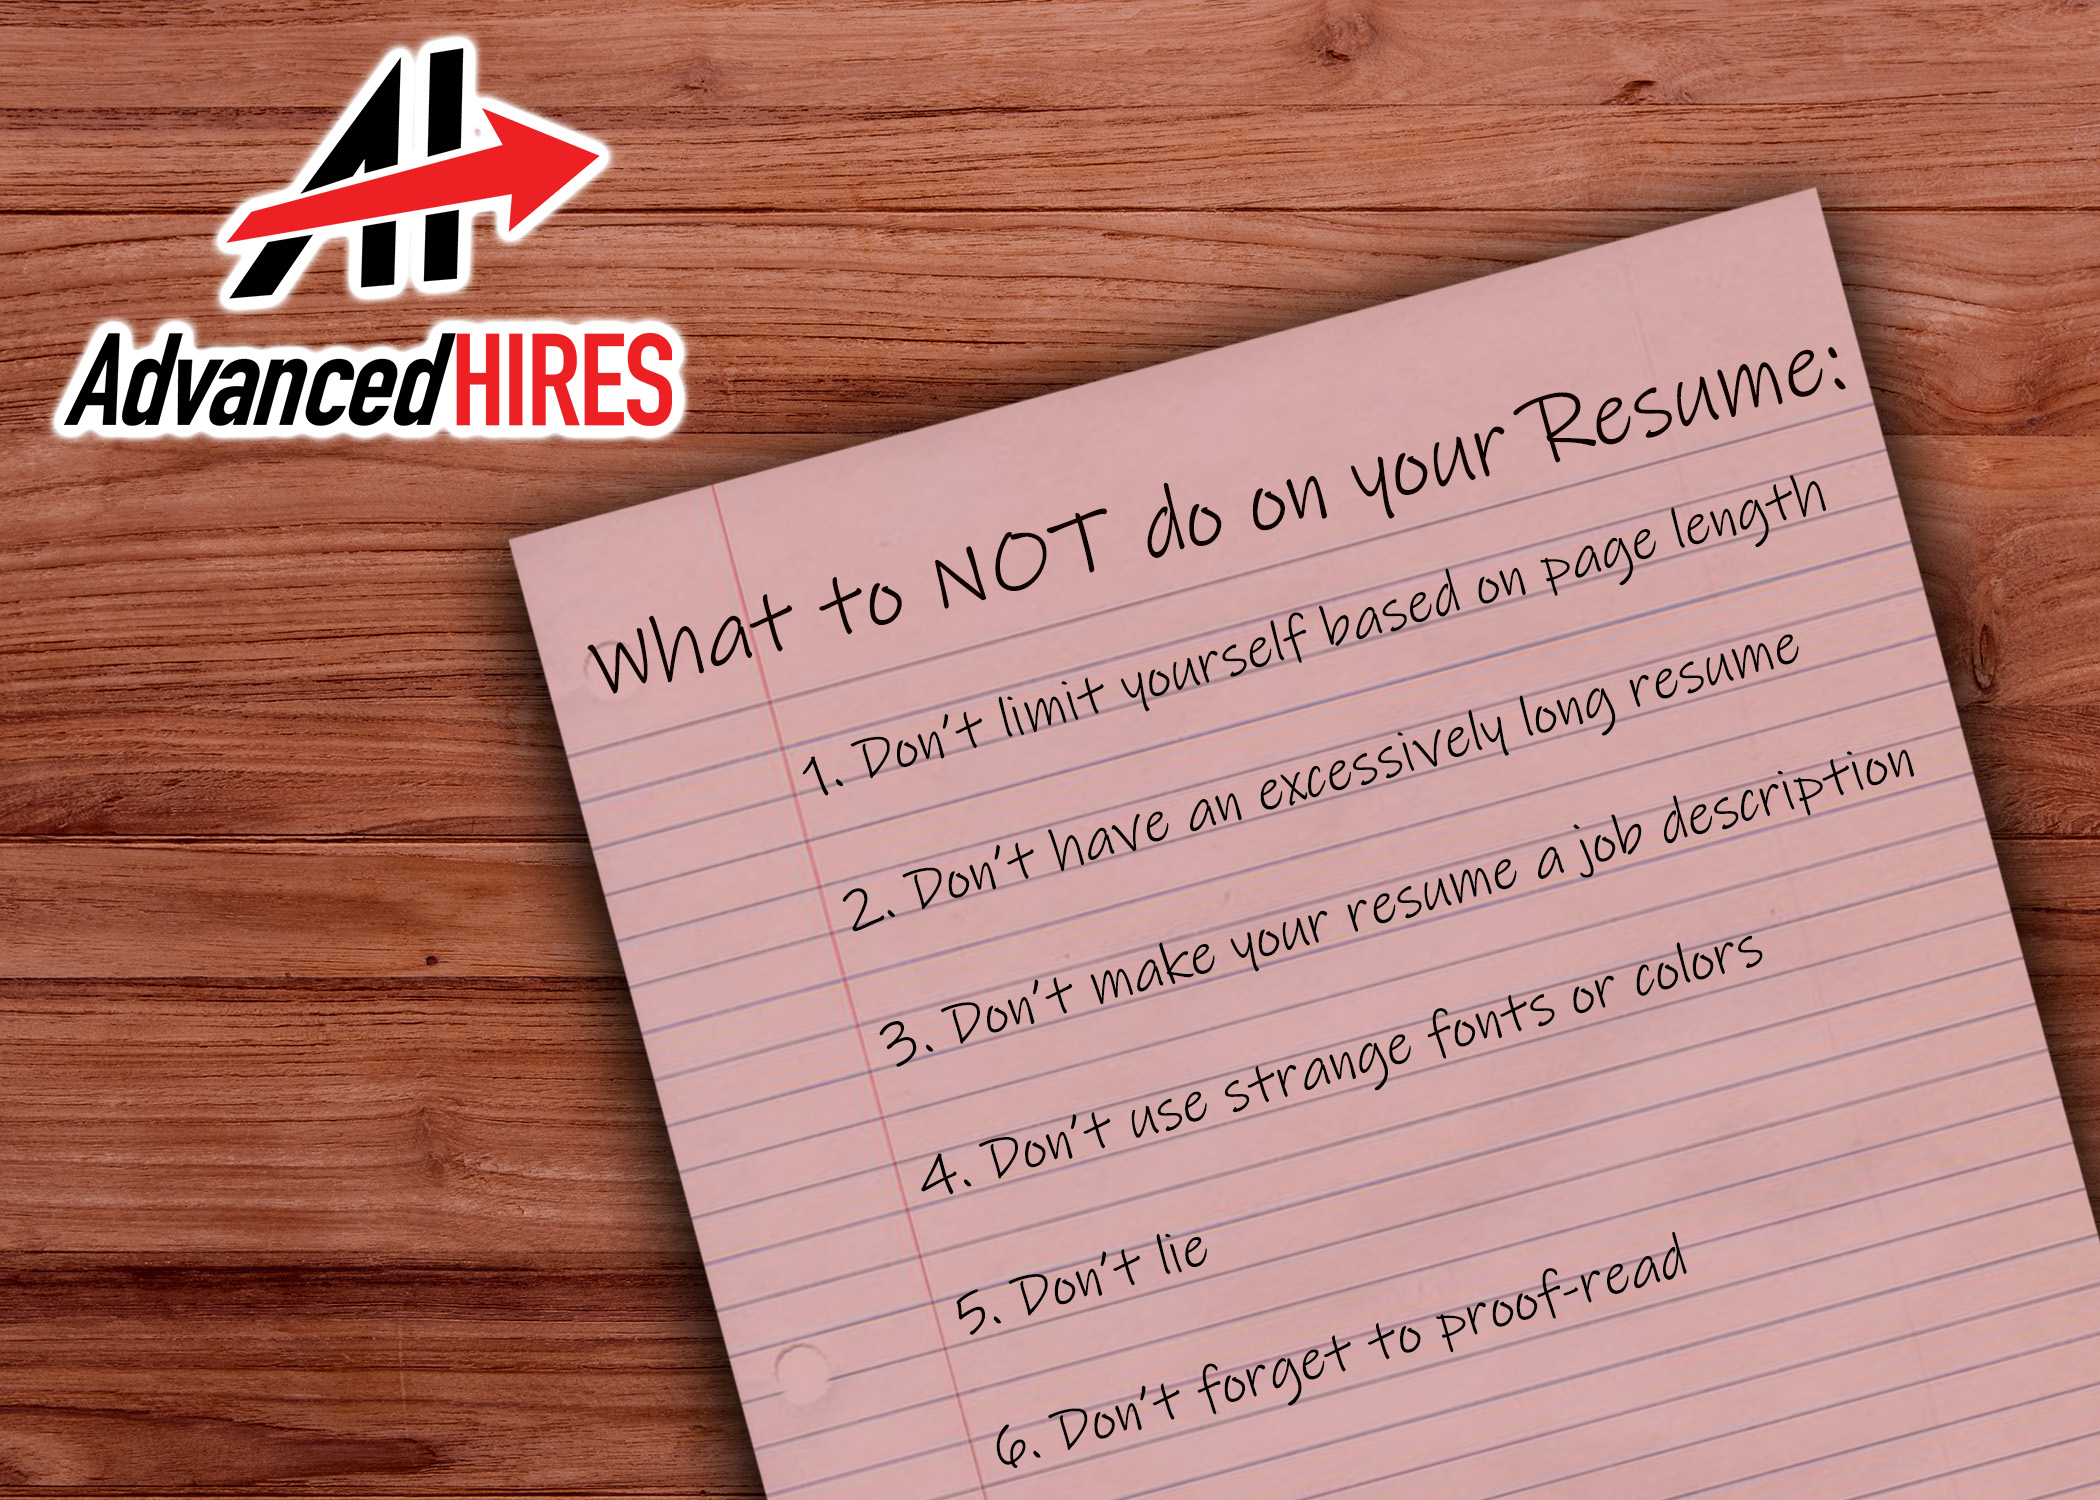 Want to Impress With Your Resume? Here's What NOT to Do